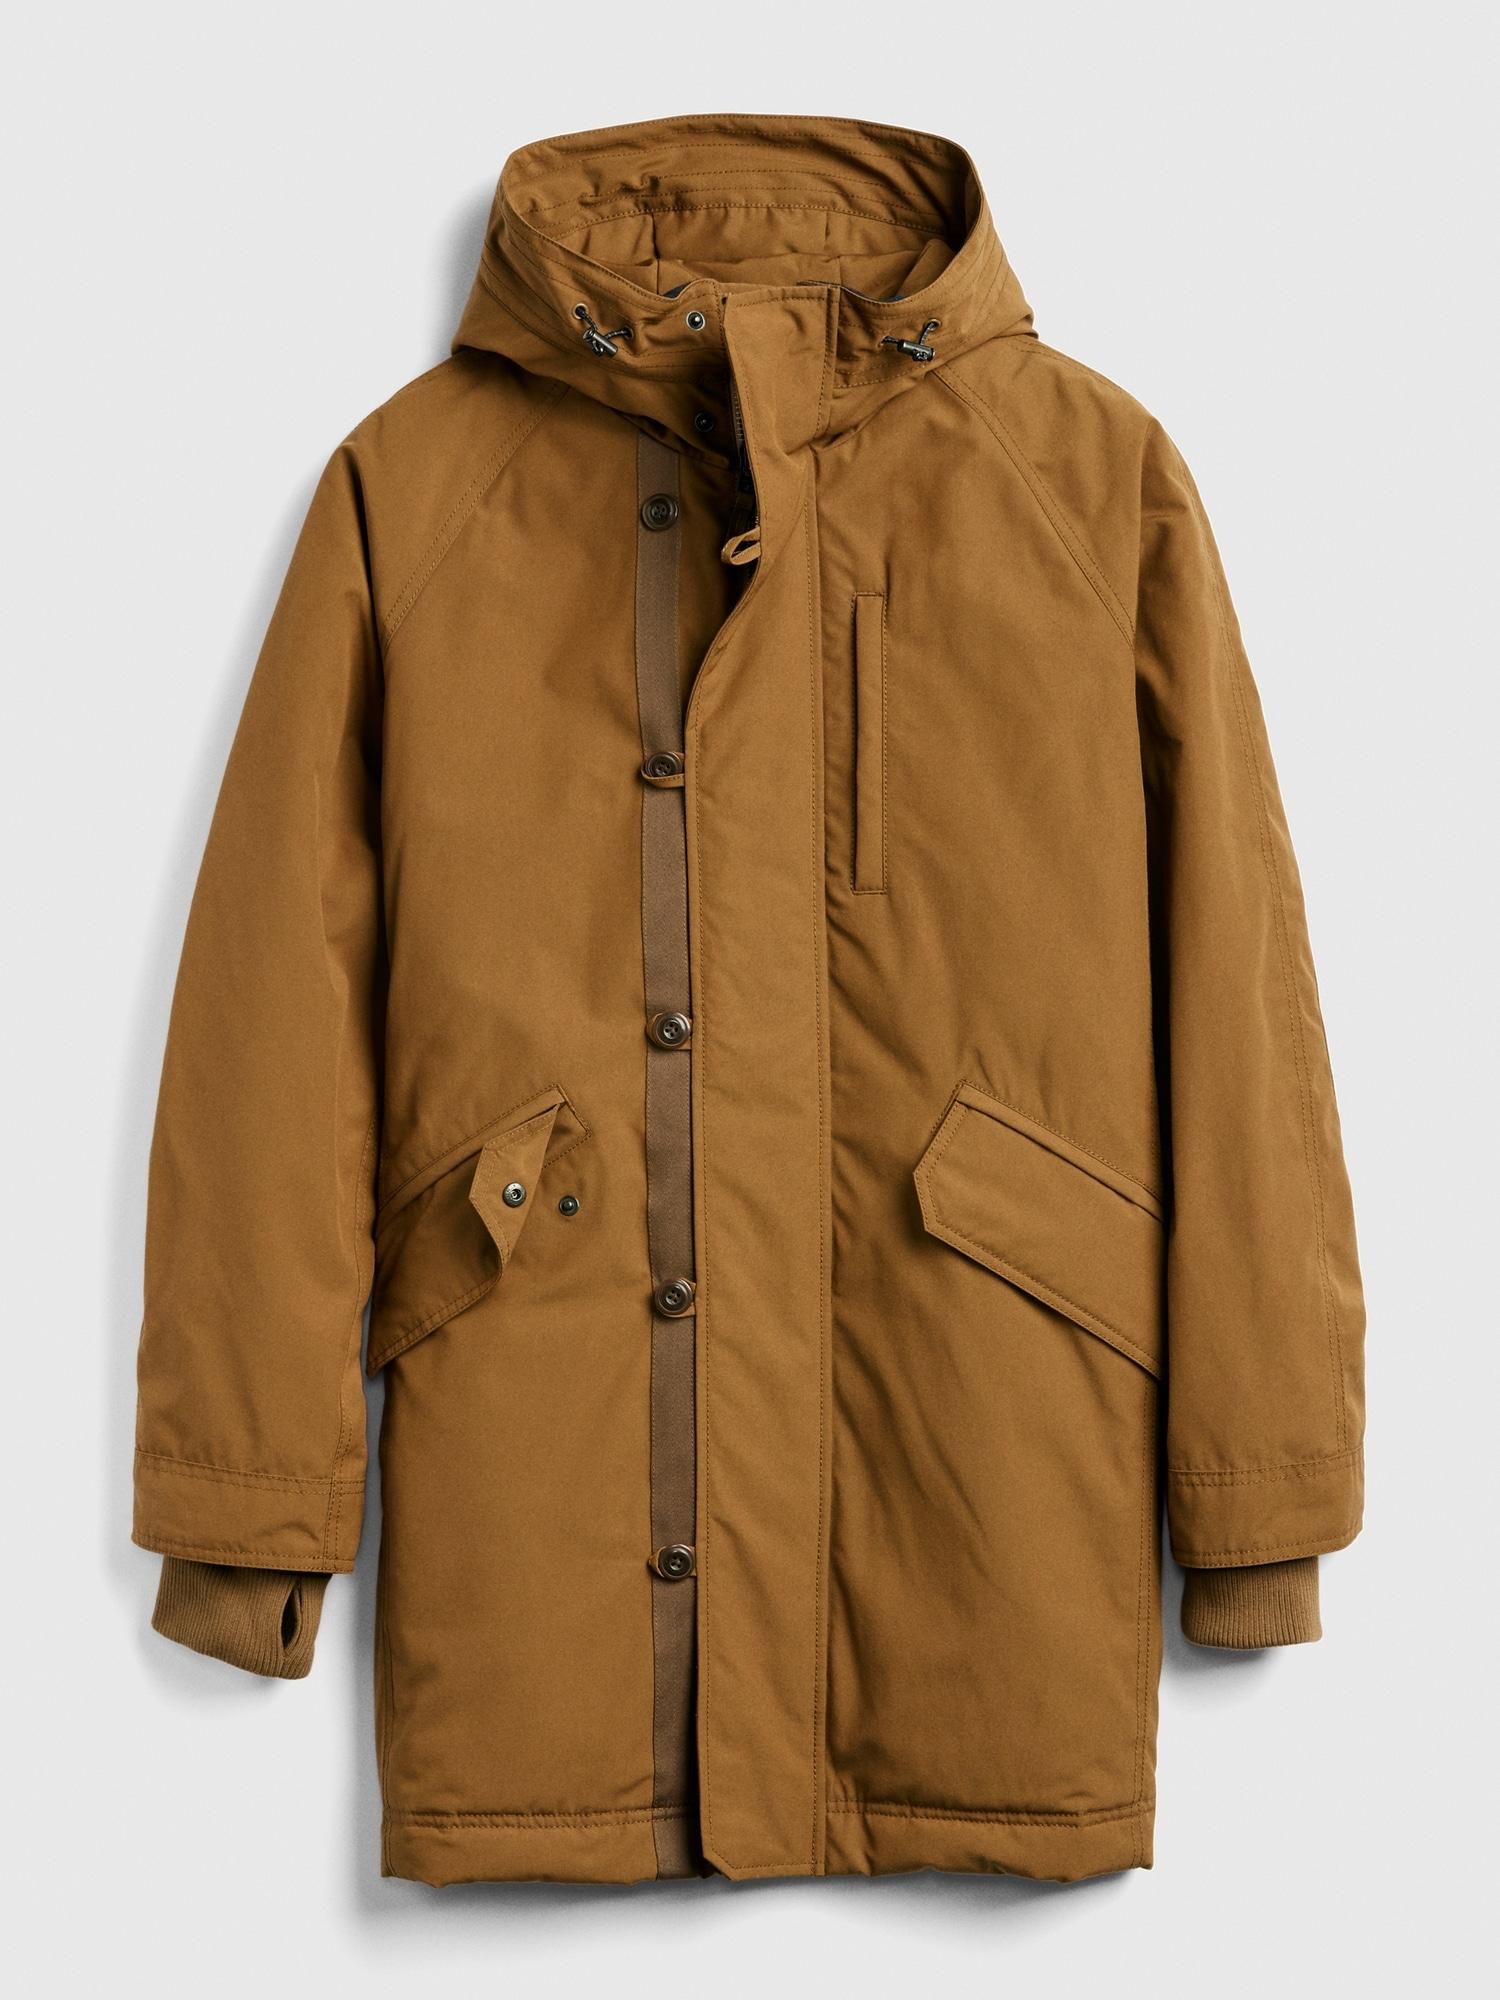 Gap Cotton Coldcontrol Max Modern Parka Jacket in Brown for Men - Lyst